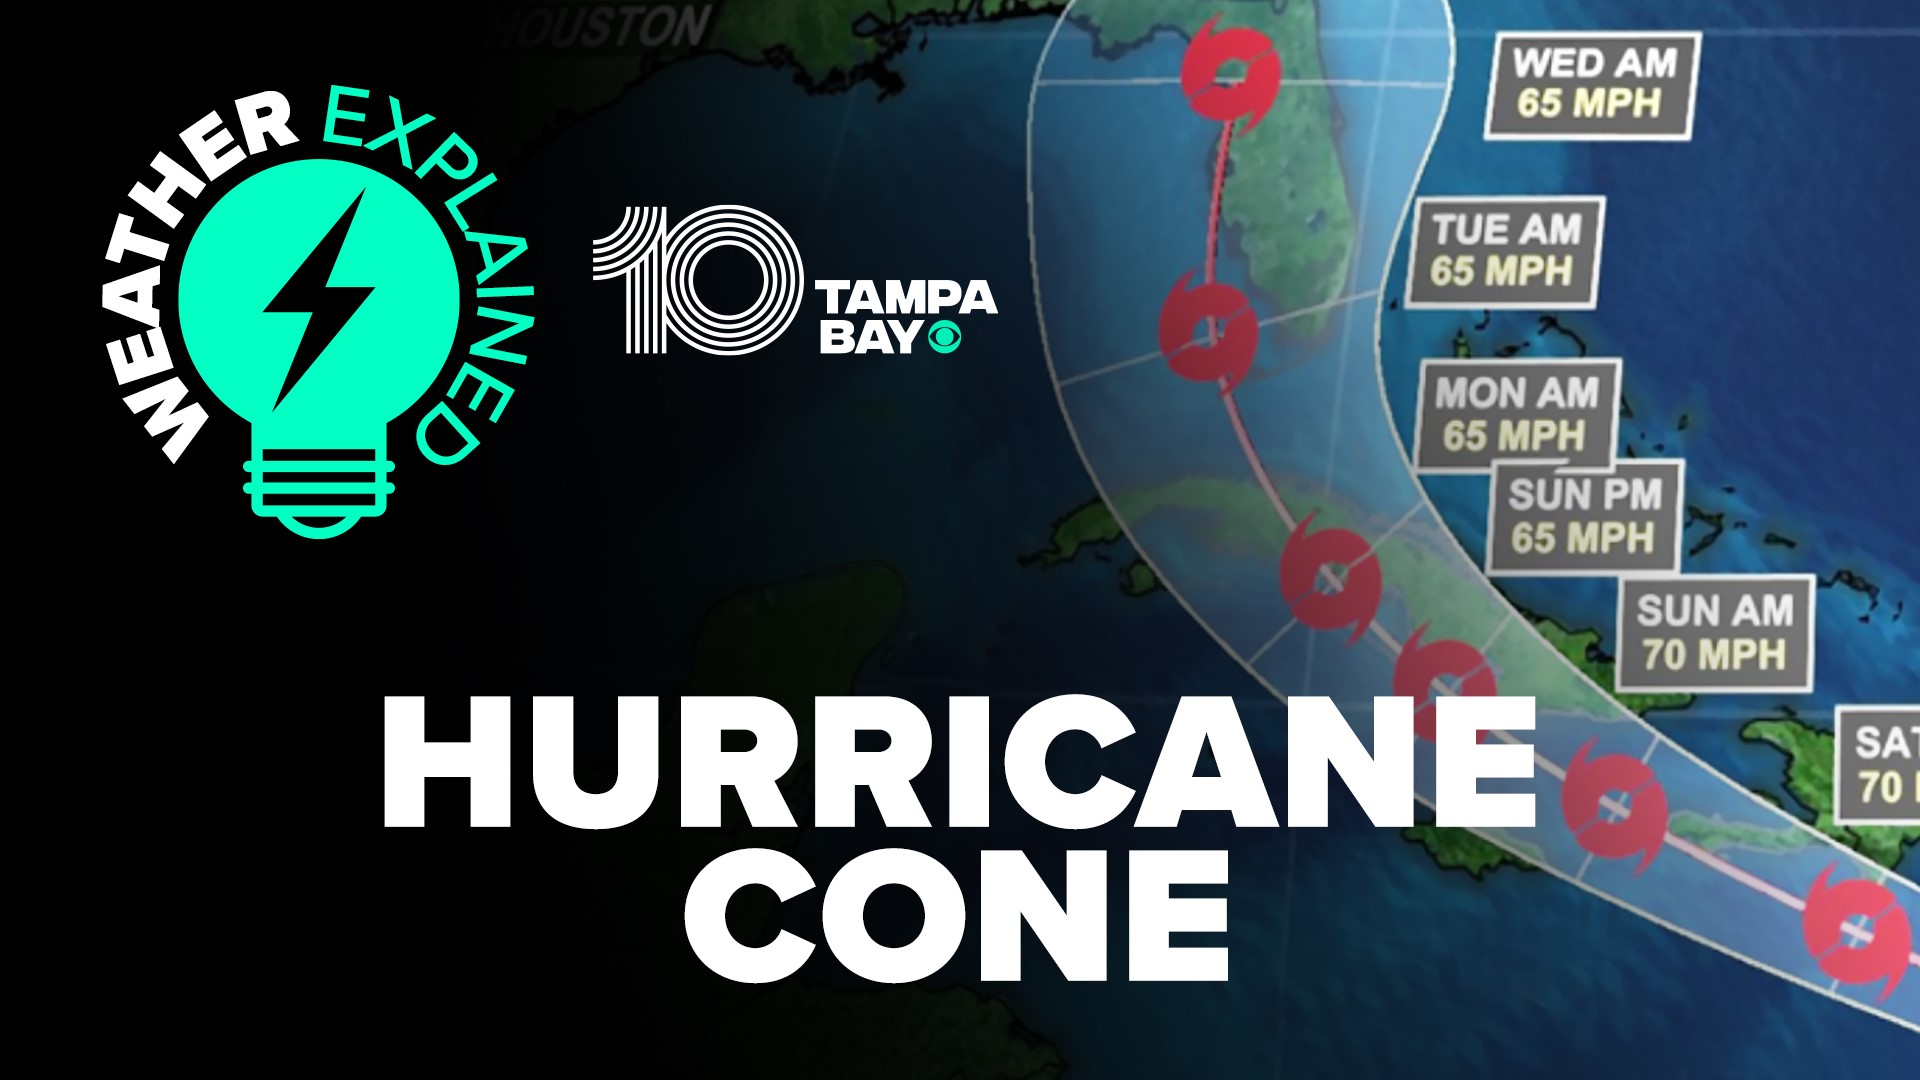 Chief Meteorologist Bobby Deskins explains what hurricane forecast track cones actually mean.